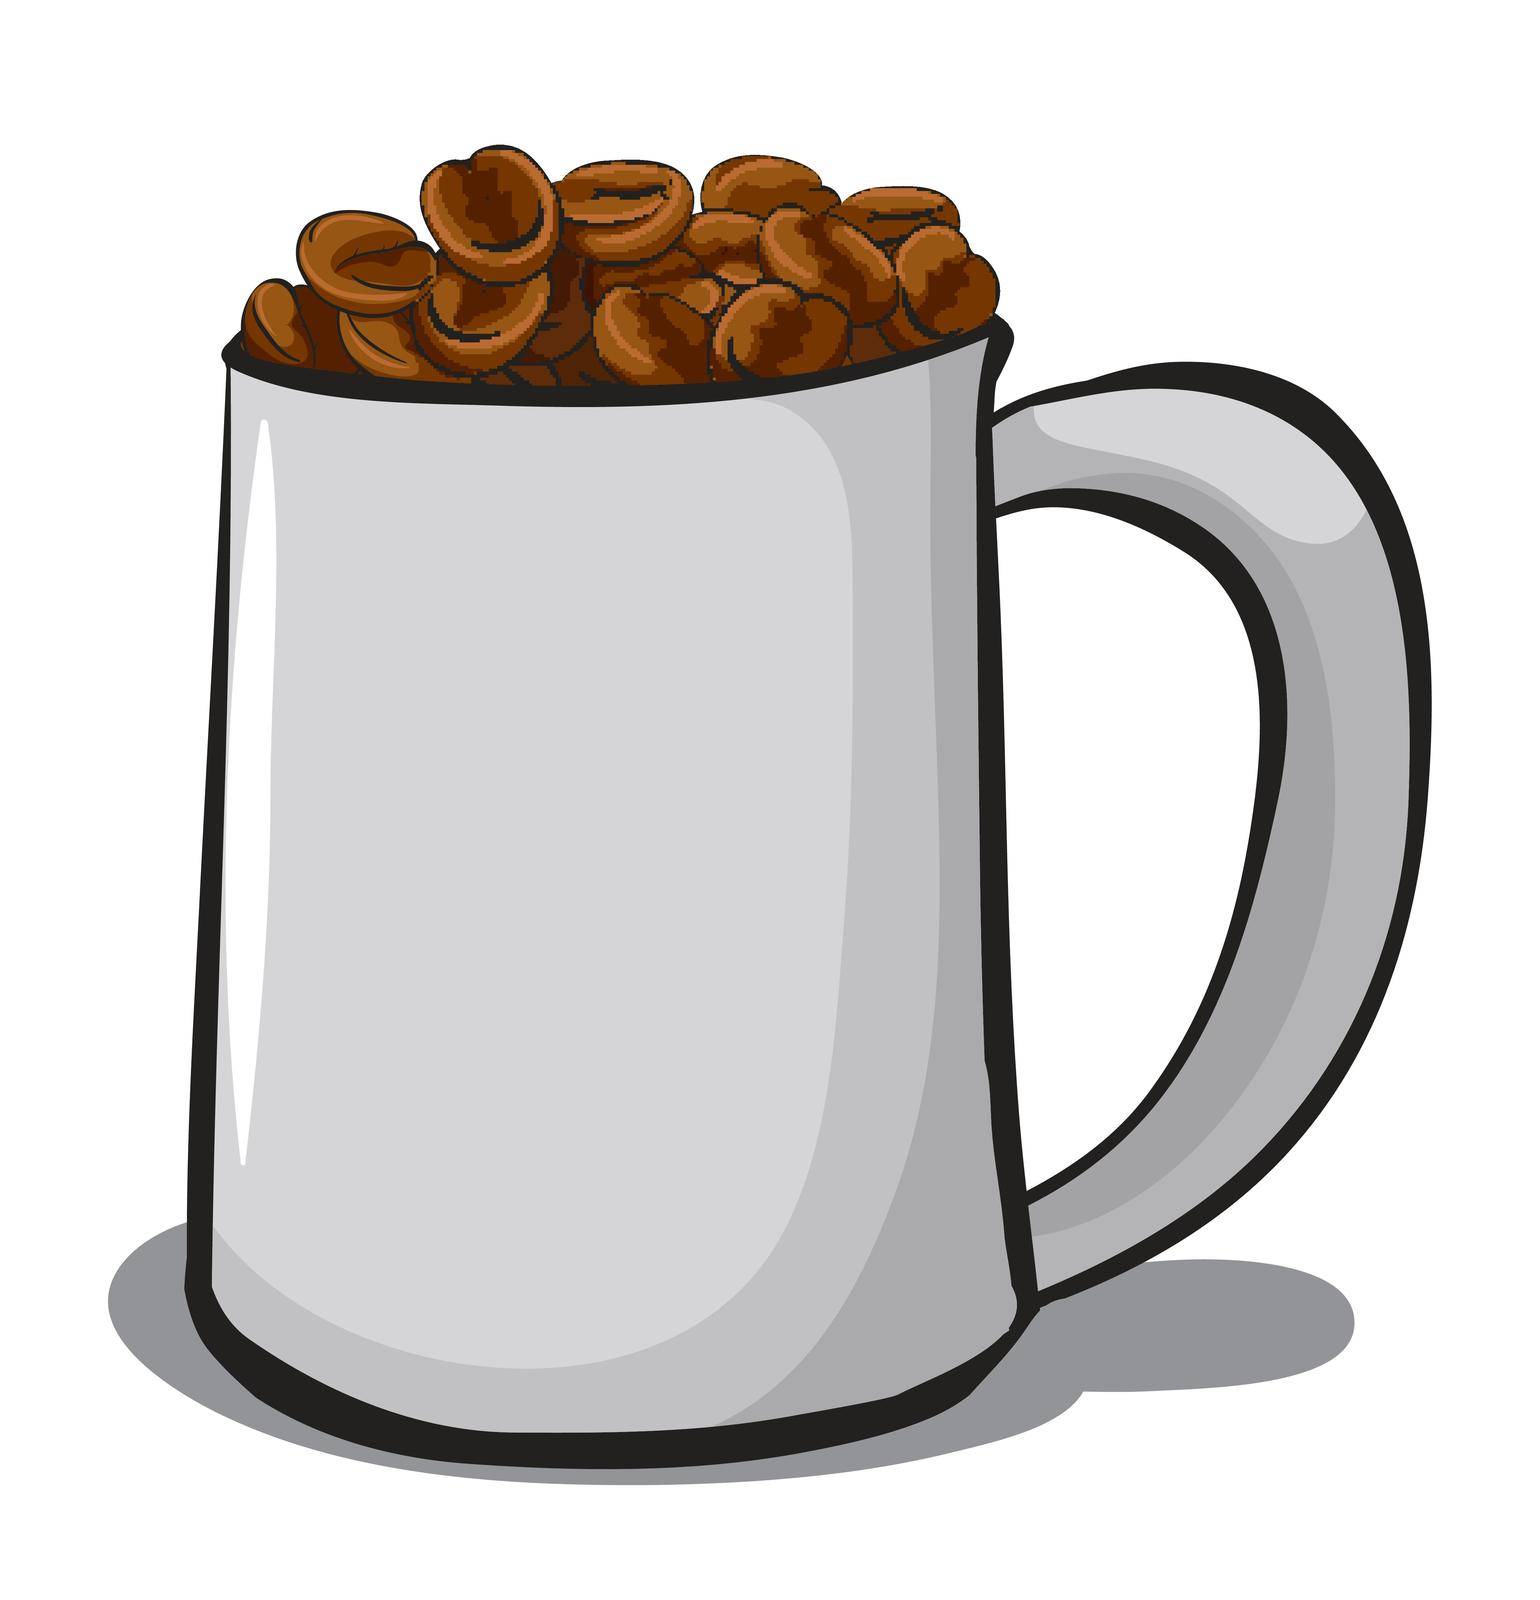 A mug full of coffee beans on a white background